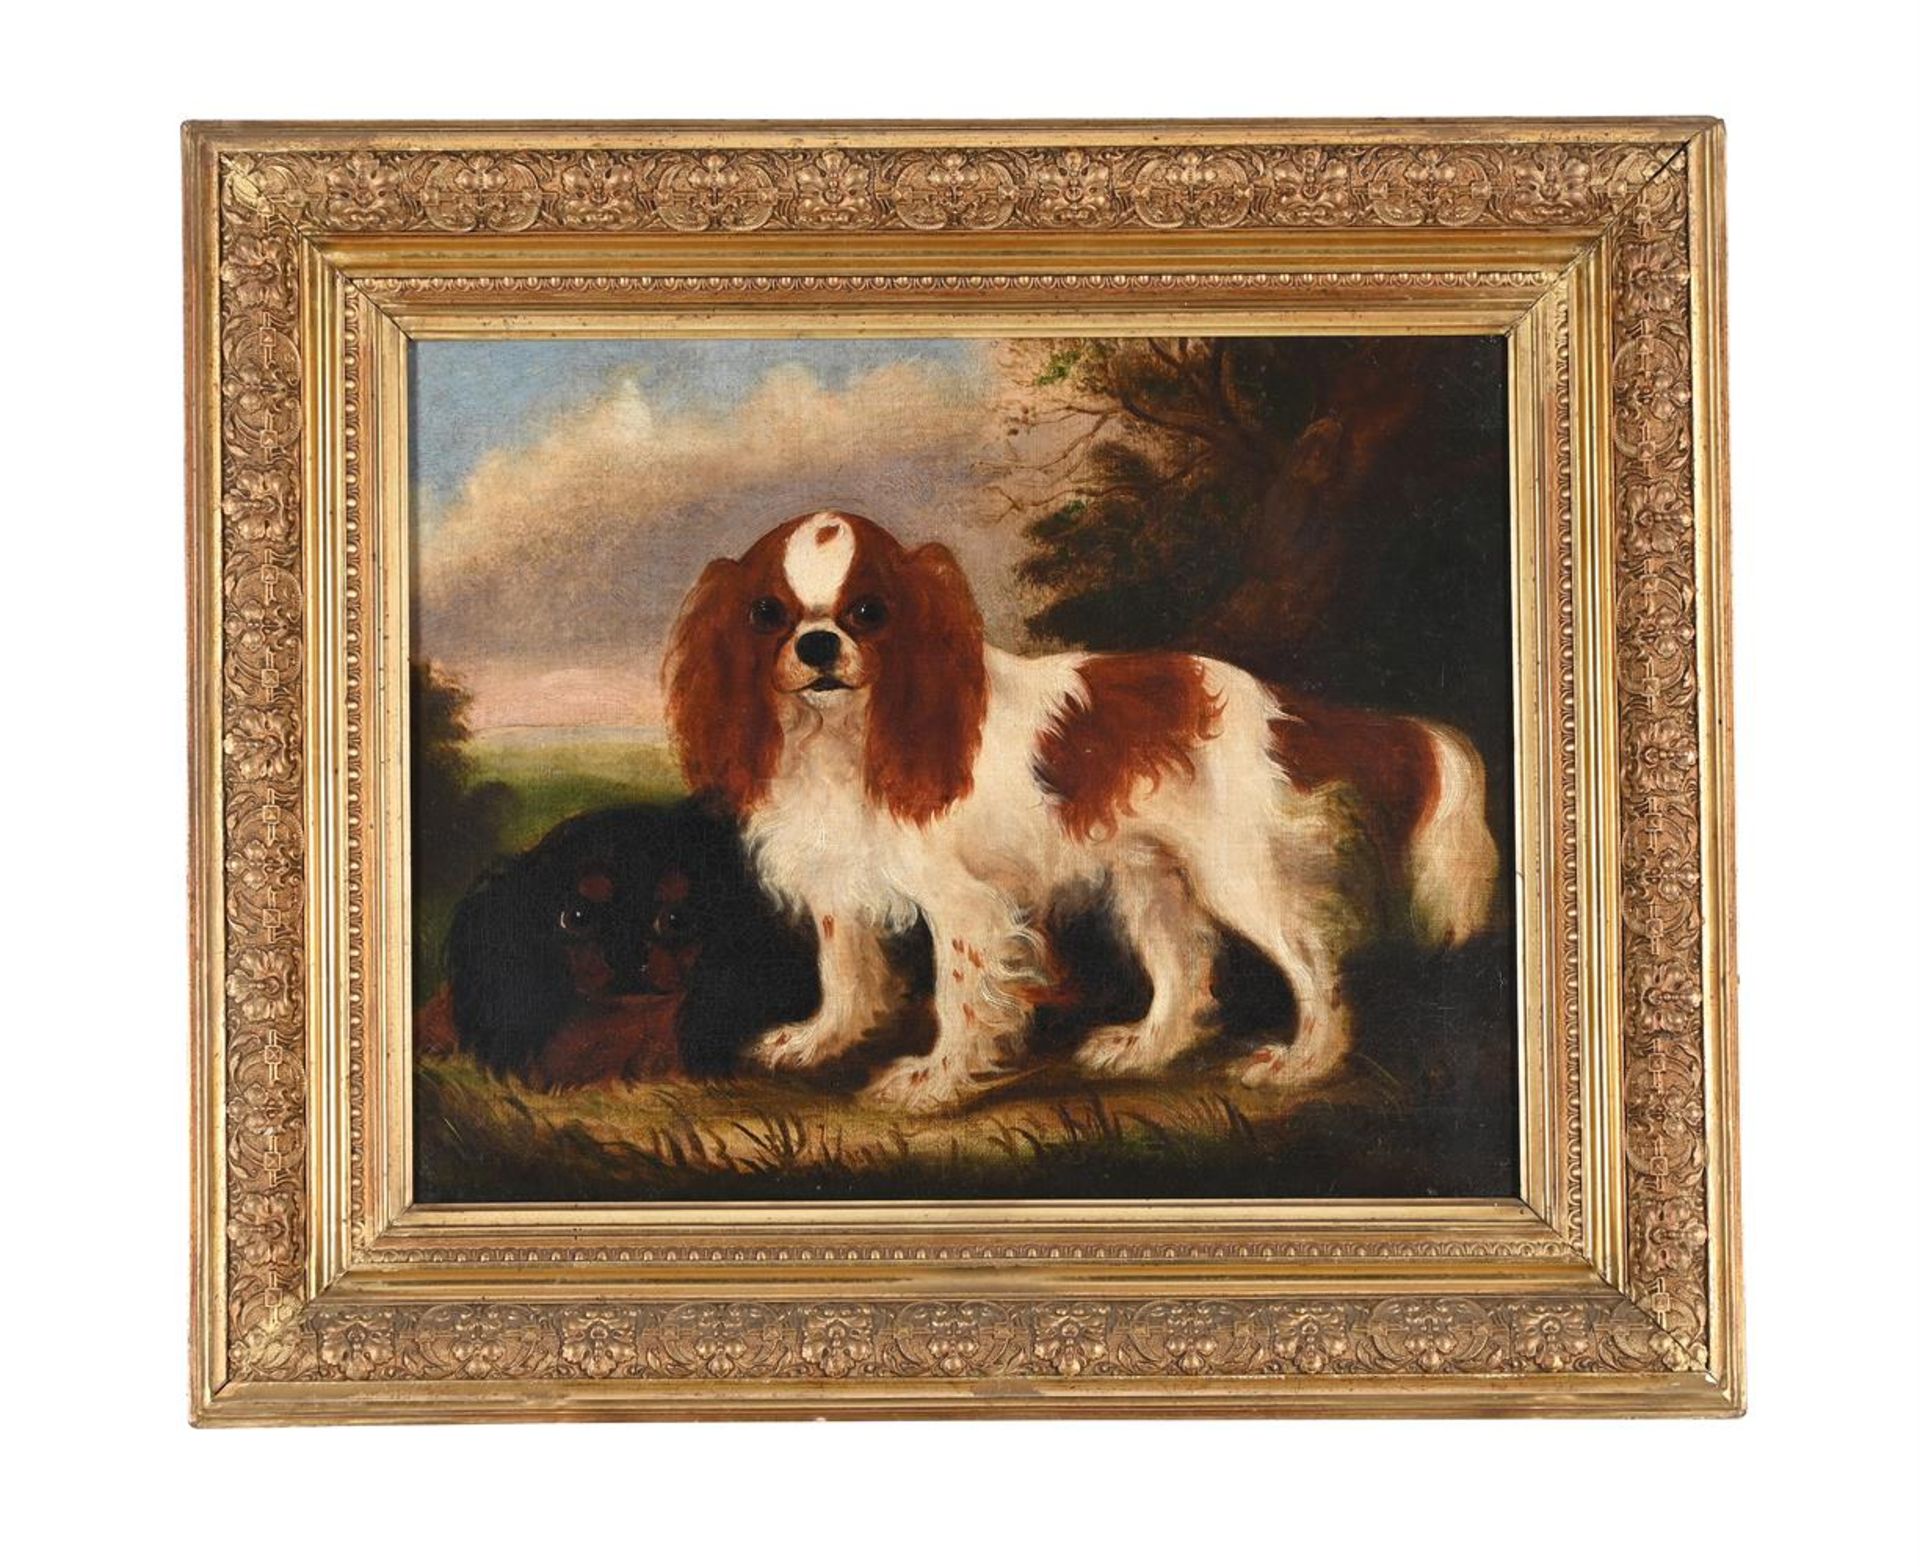 BRITISH PROVINCIAL SCHOOL (19TH CENTURY), A PAIR OF SPANIELS - Image 3 of 5